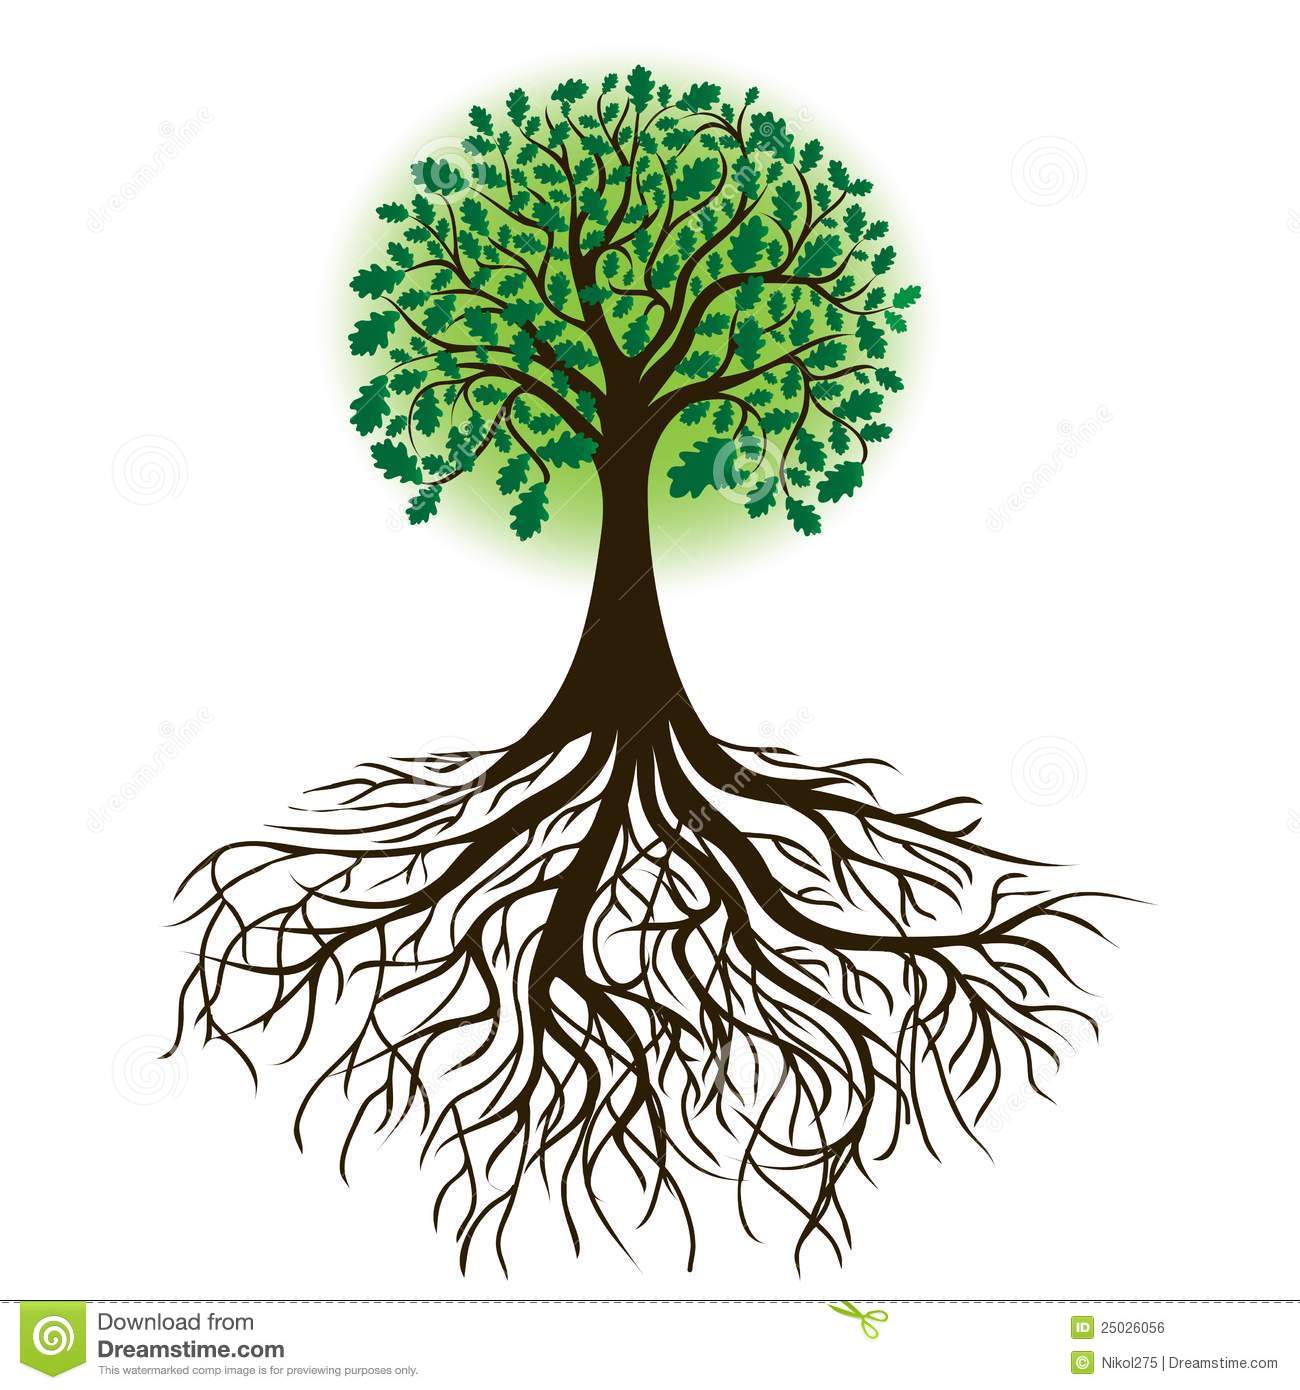 trees with roots clip art - Bing images